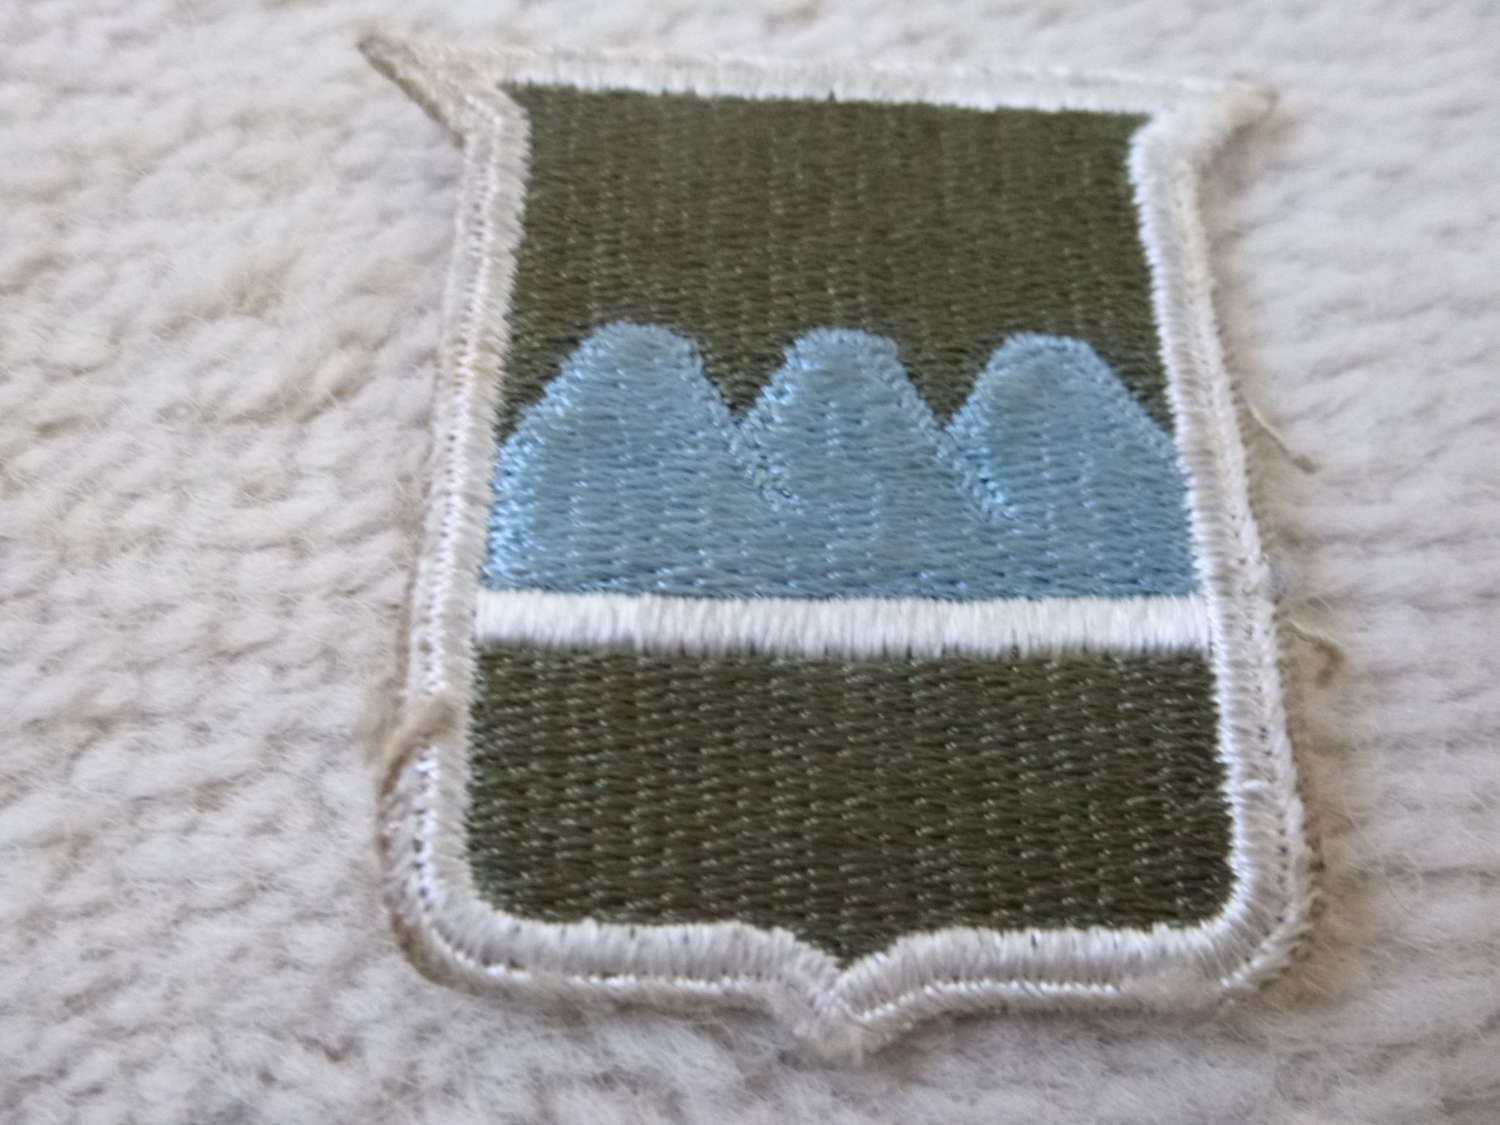 US army 80th infantry division patch